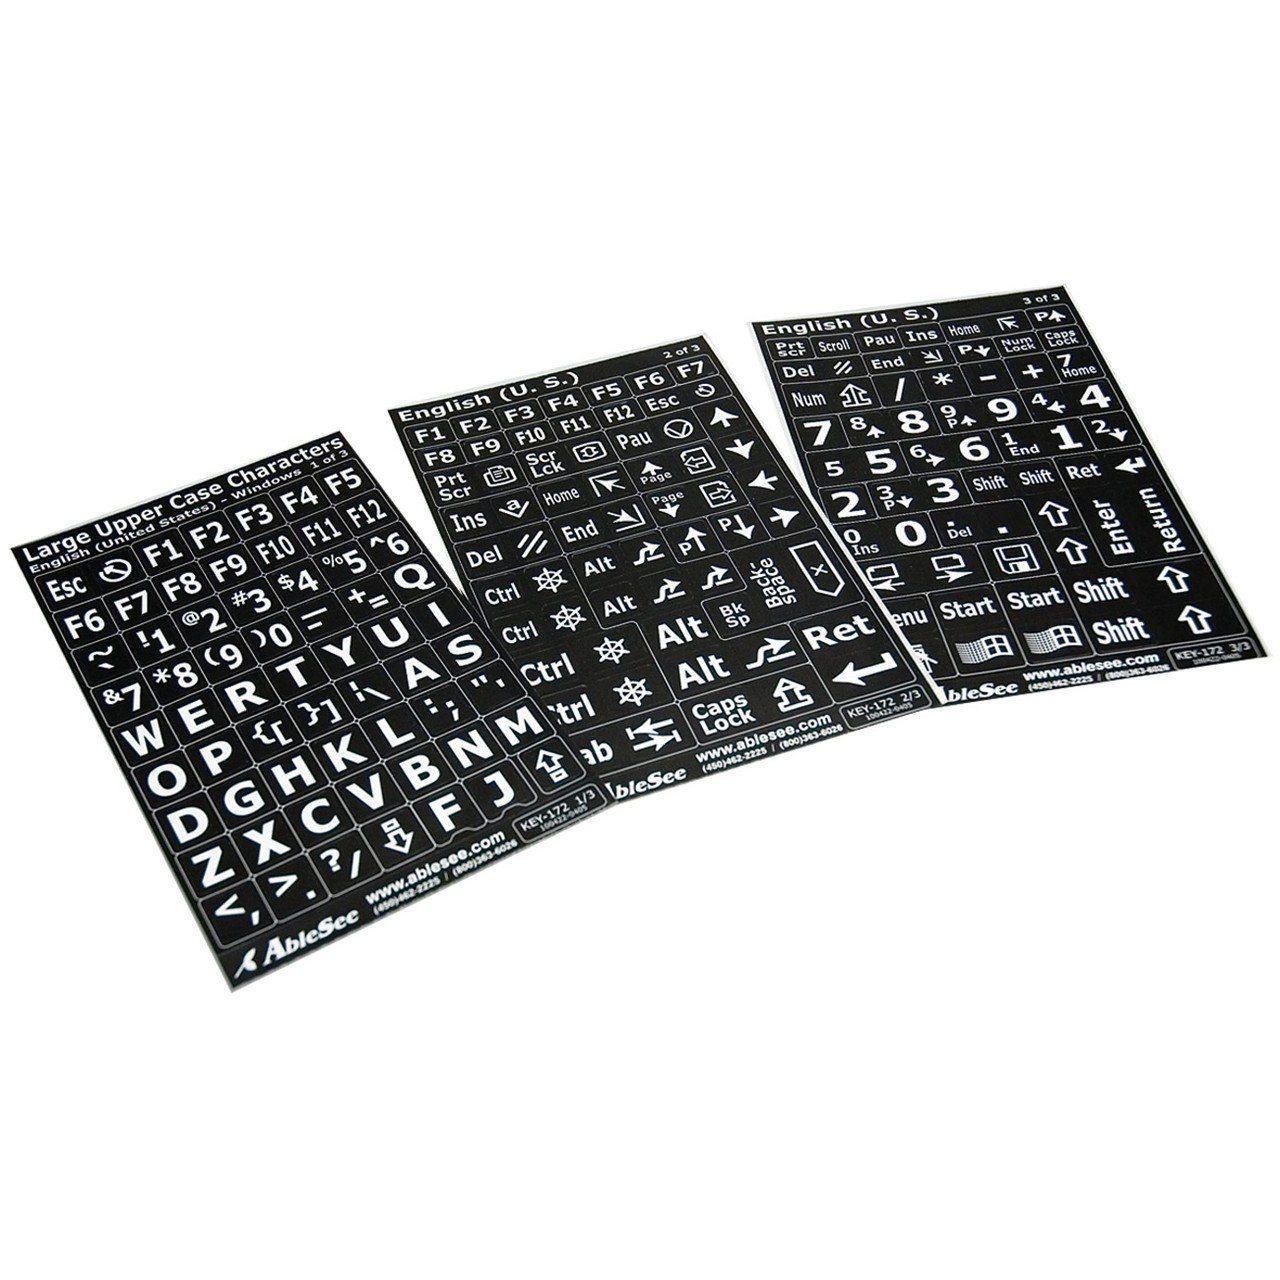 KeyBoard Labels White on Black - The Low Vision Store